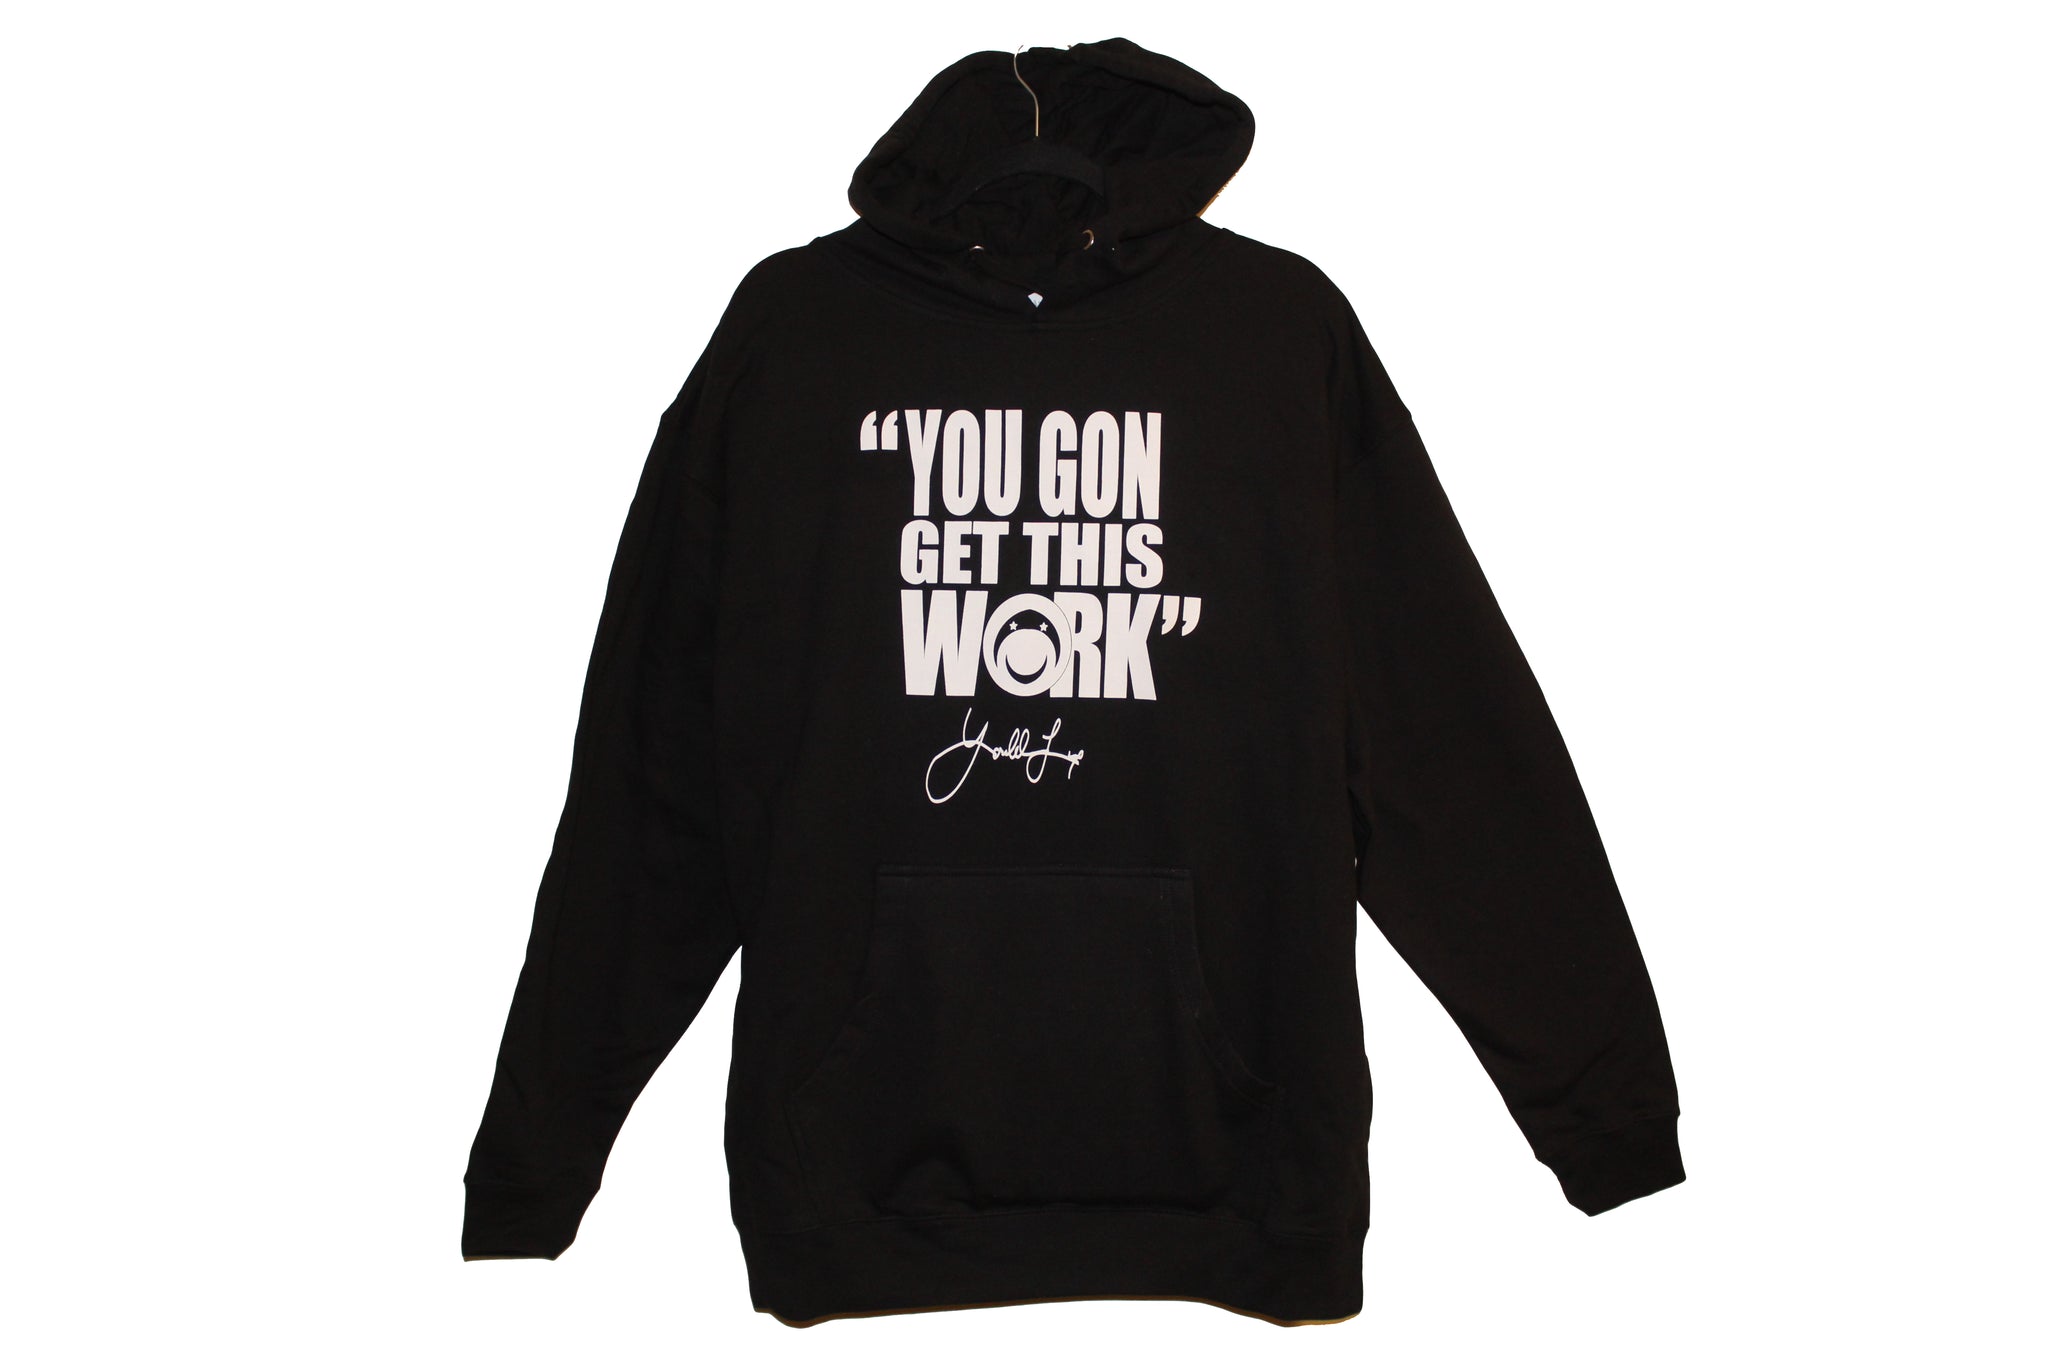 Bucaleany "You Gon Get This Work" T-shirt or hoody